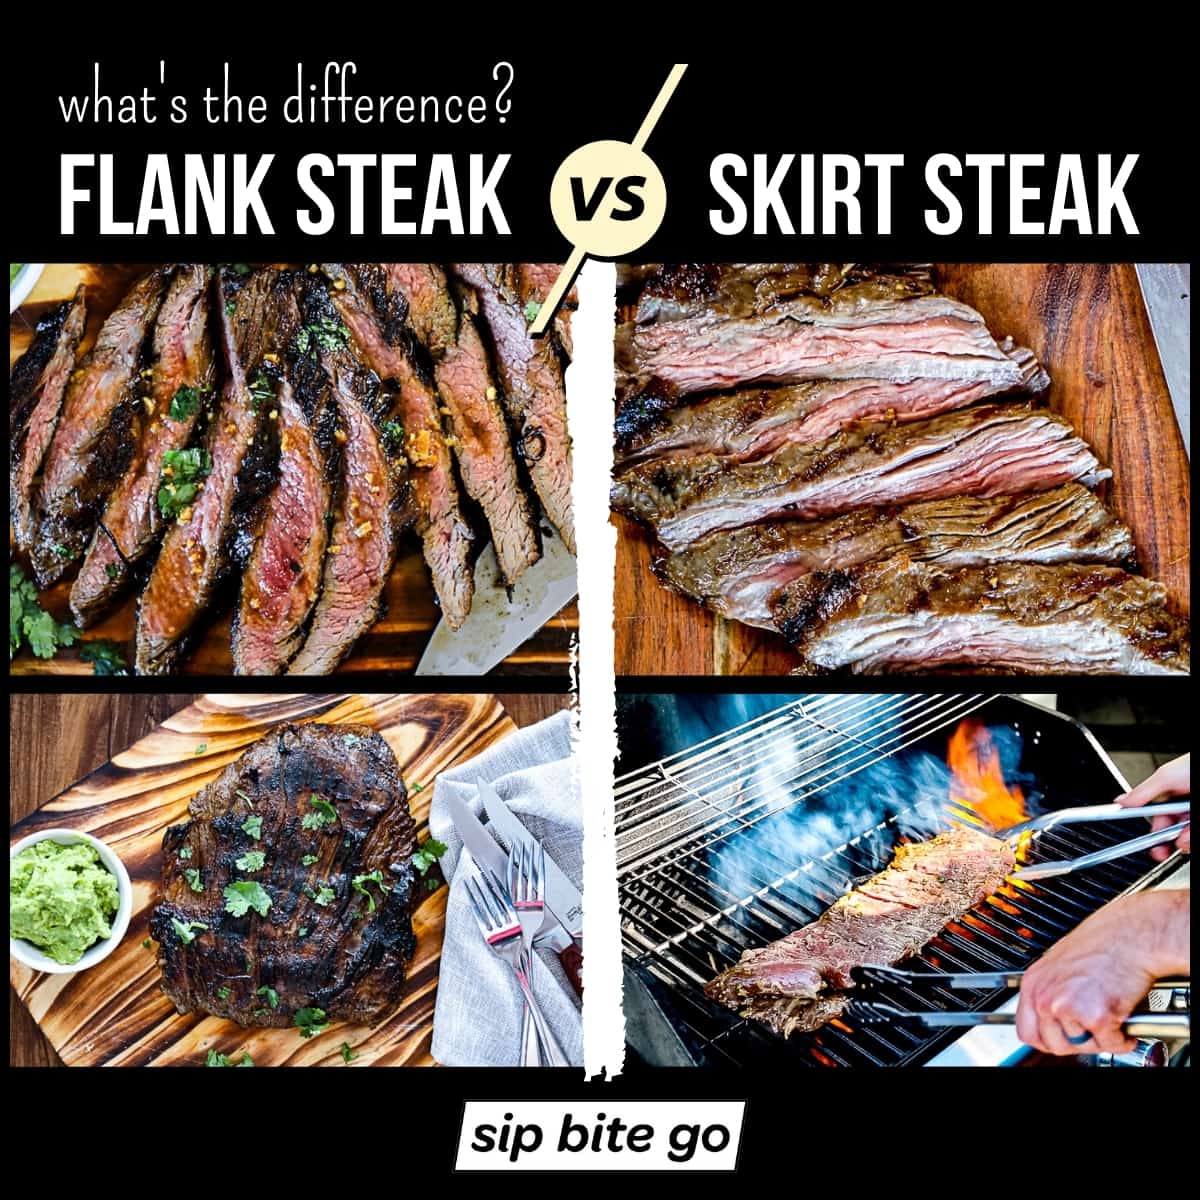 Infographic demonstrating Skirt Steak Vs Flank Steak with captions and grill images.